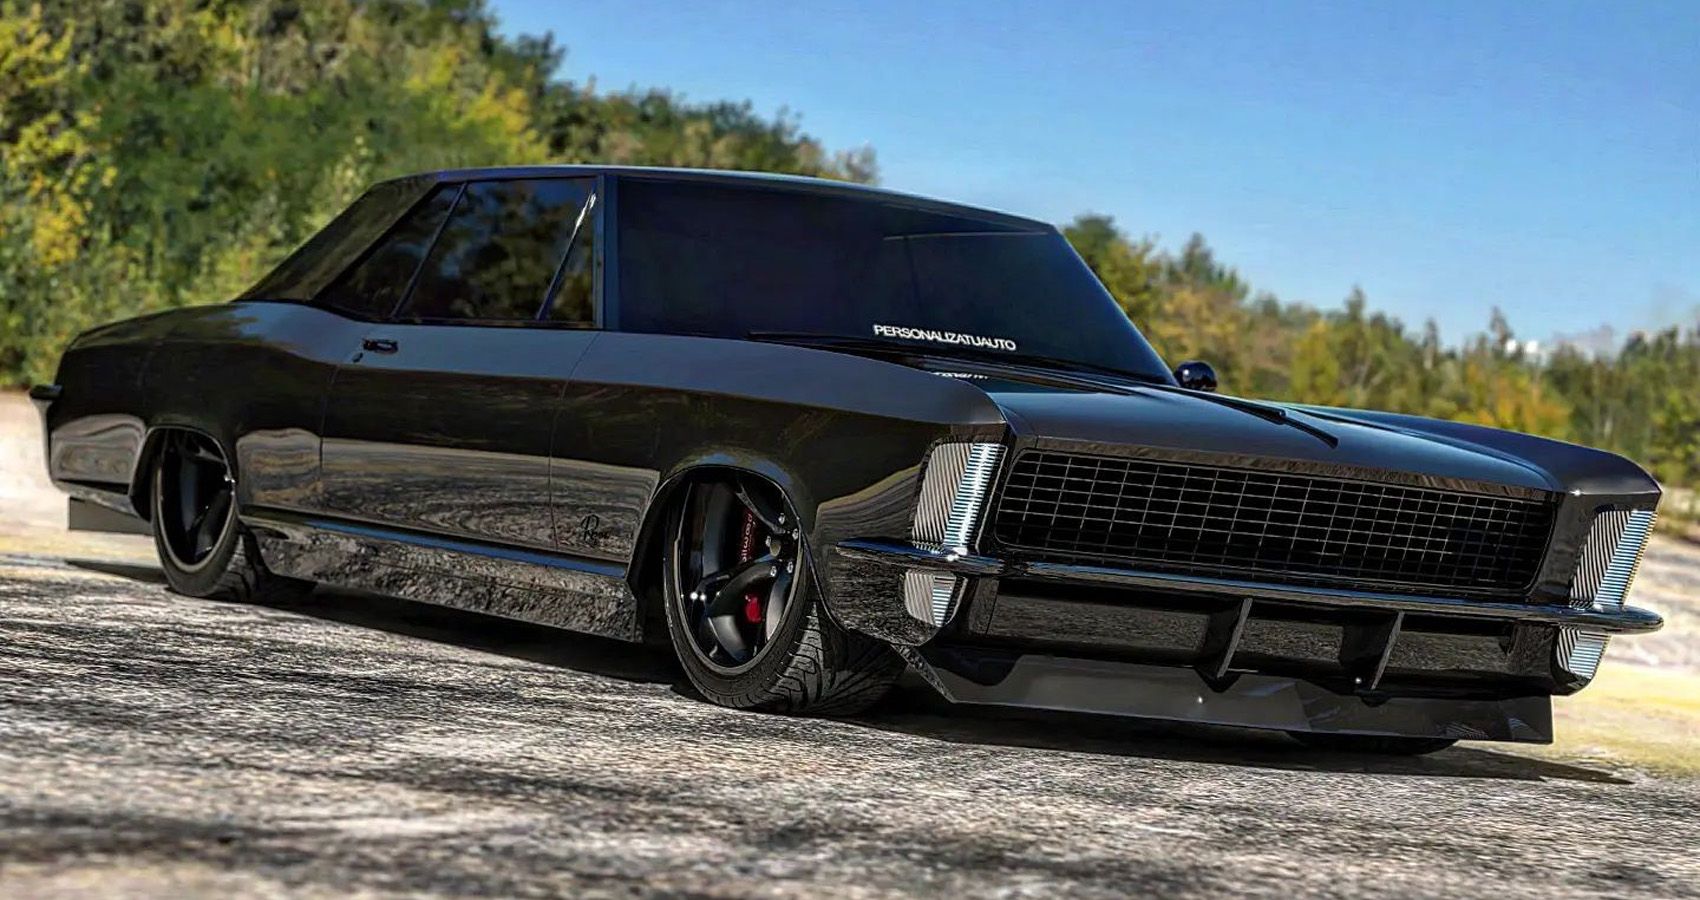 Slammed and Blacked Out 1965 Buick Riviera Render